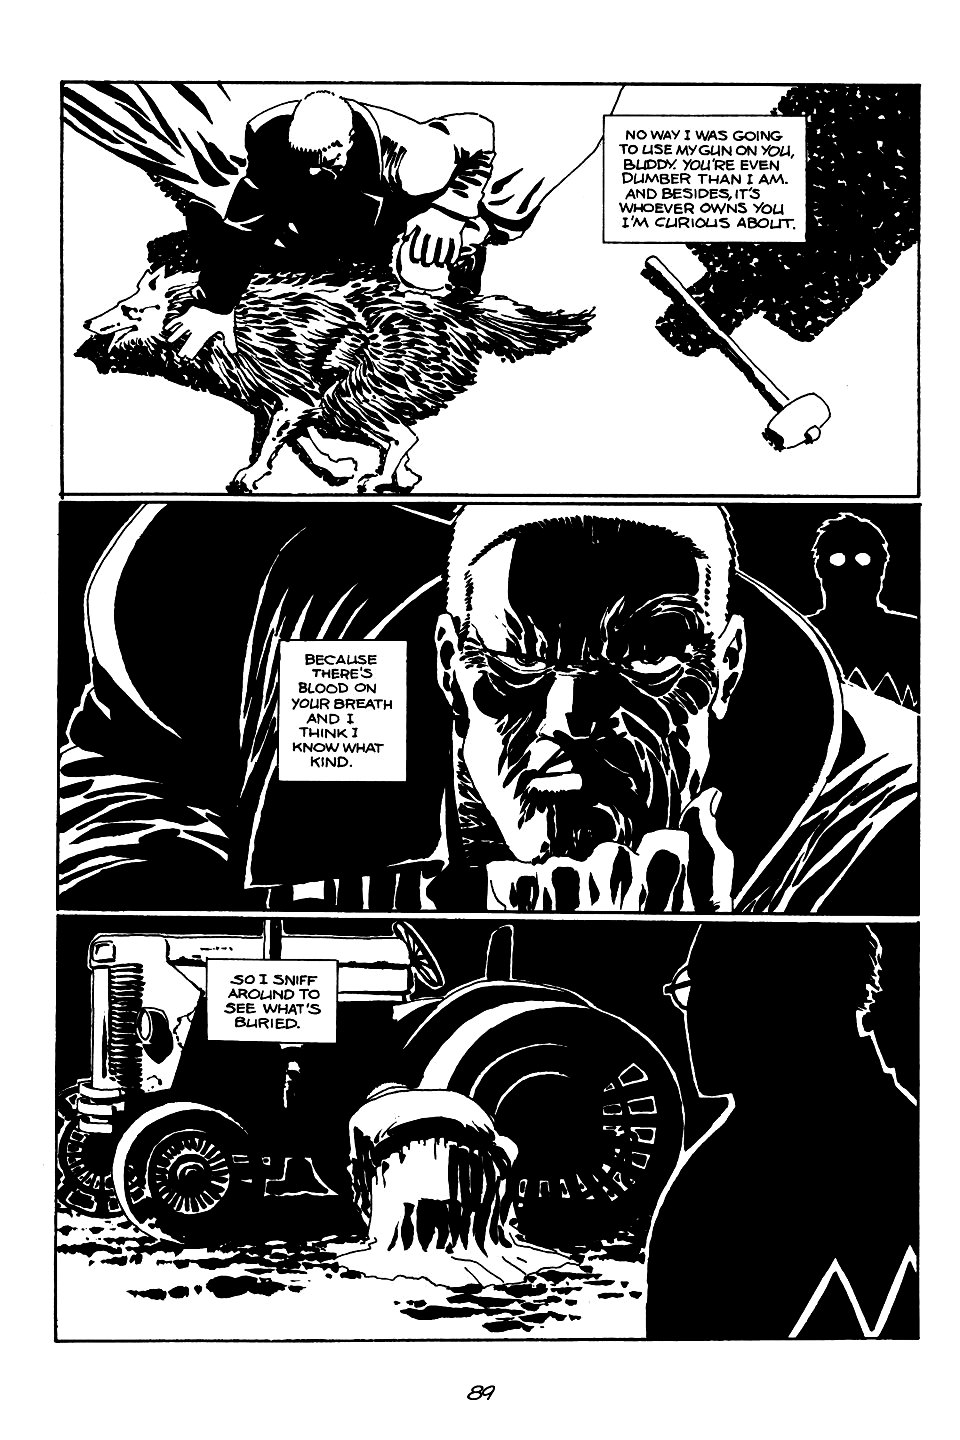 page 89 of sin city 1 the hard goodbye